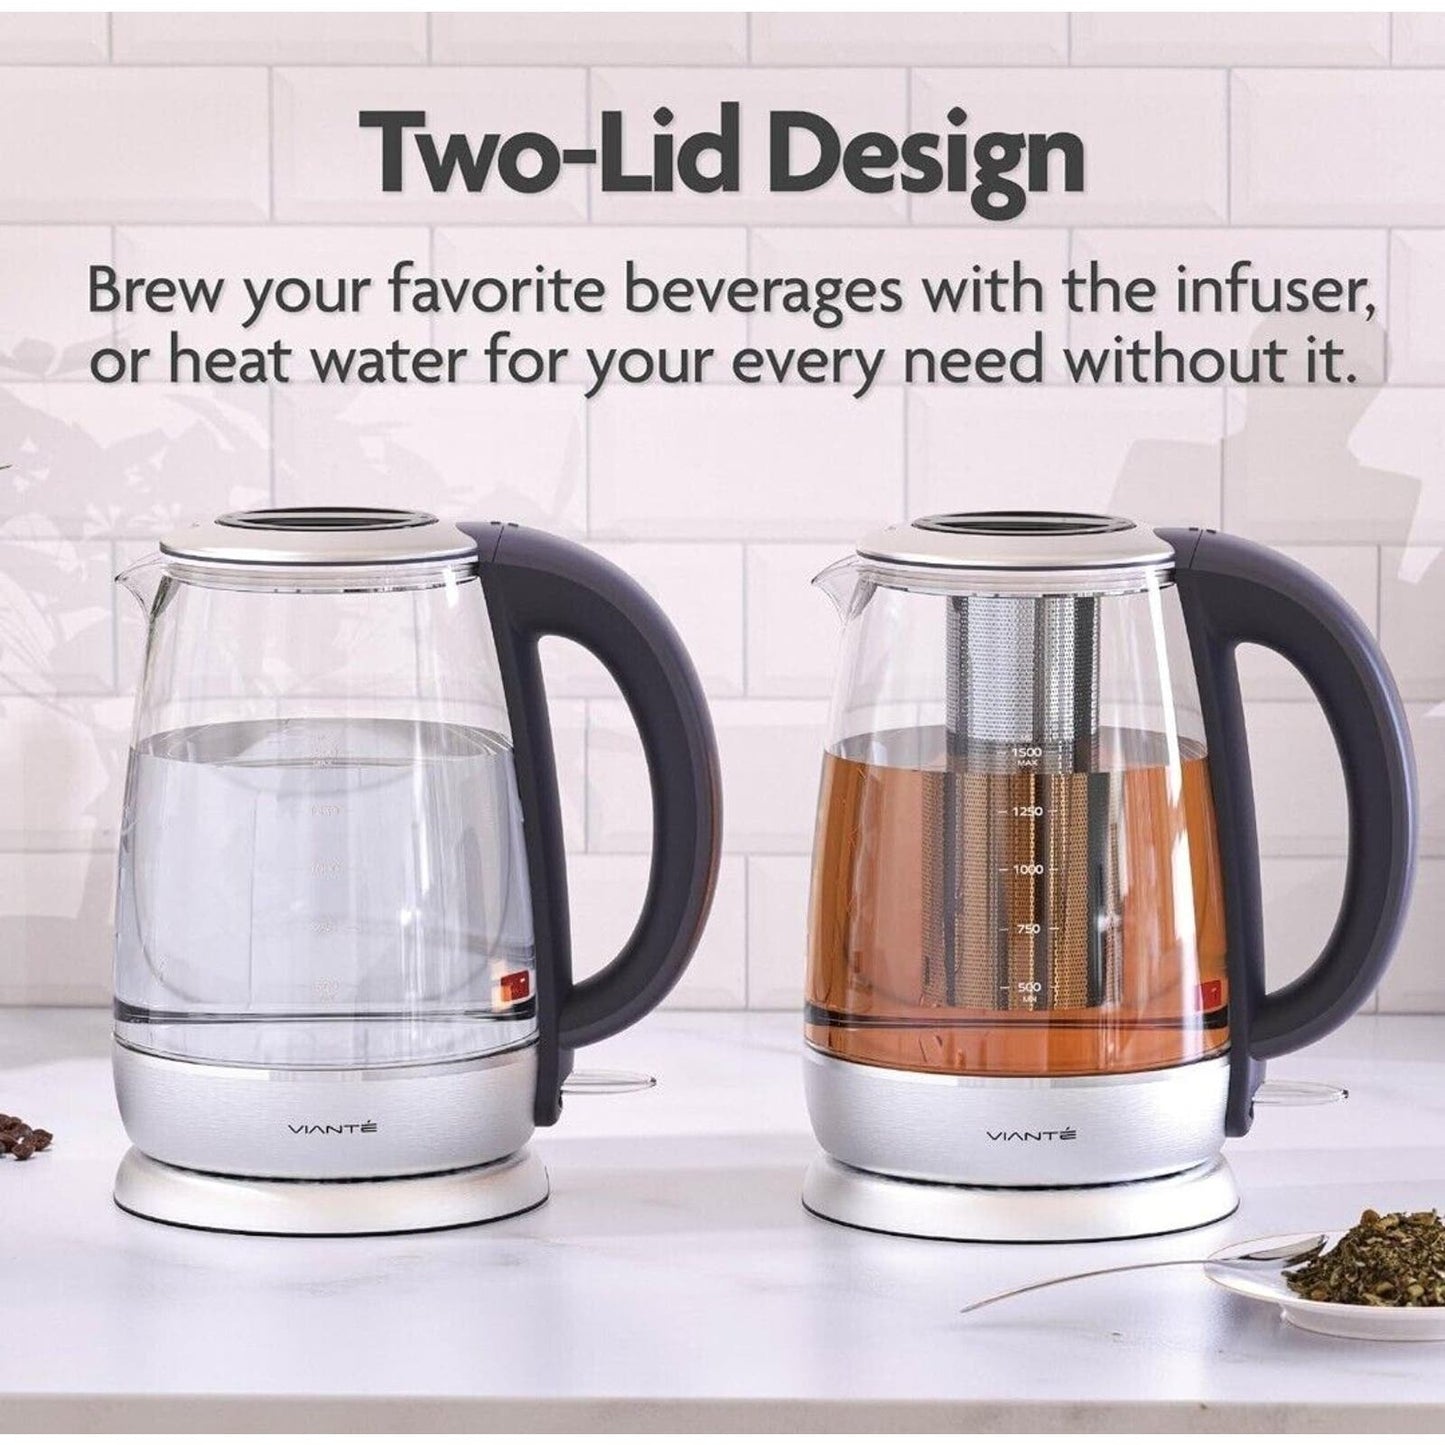 Electric Tea Kettle with Removable Infuser for Loose Leaf or Tea Bags - Vianté